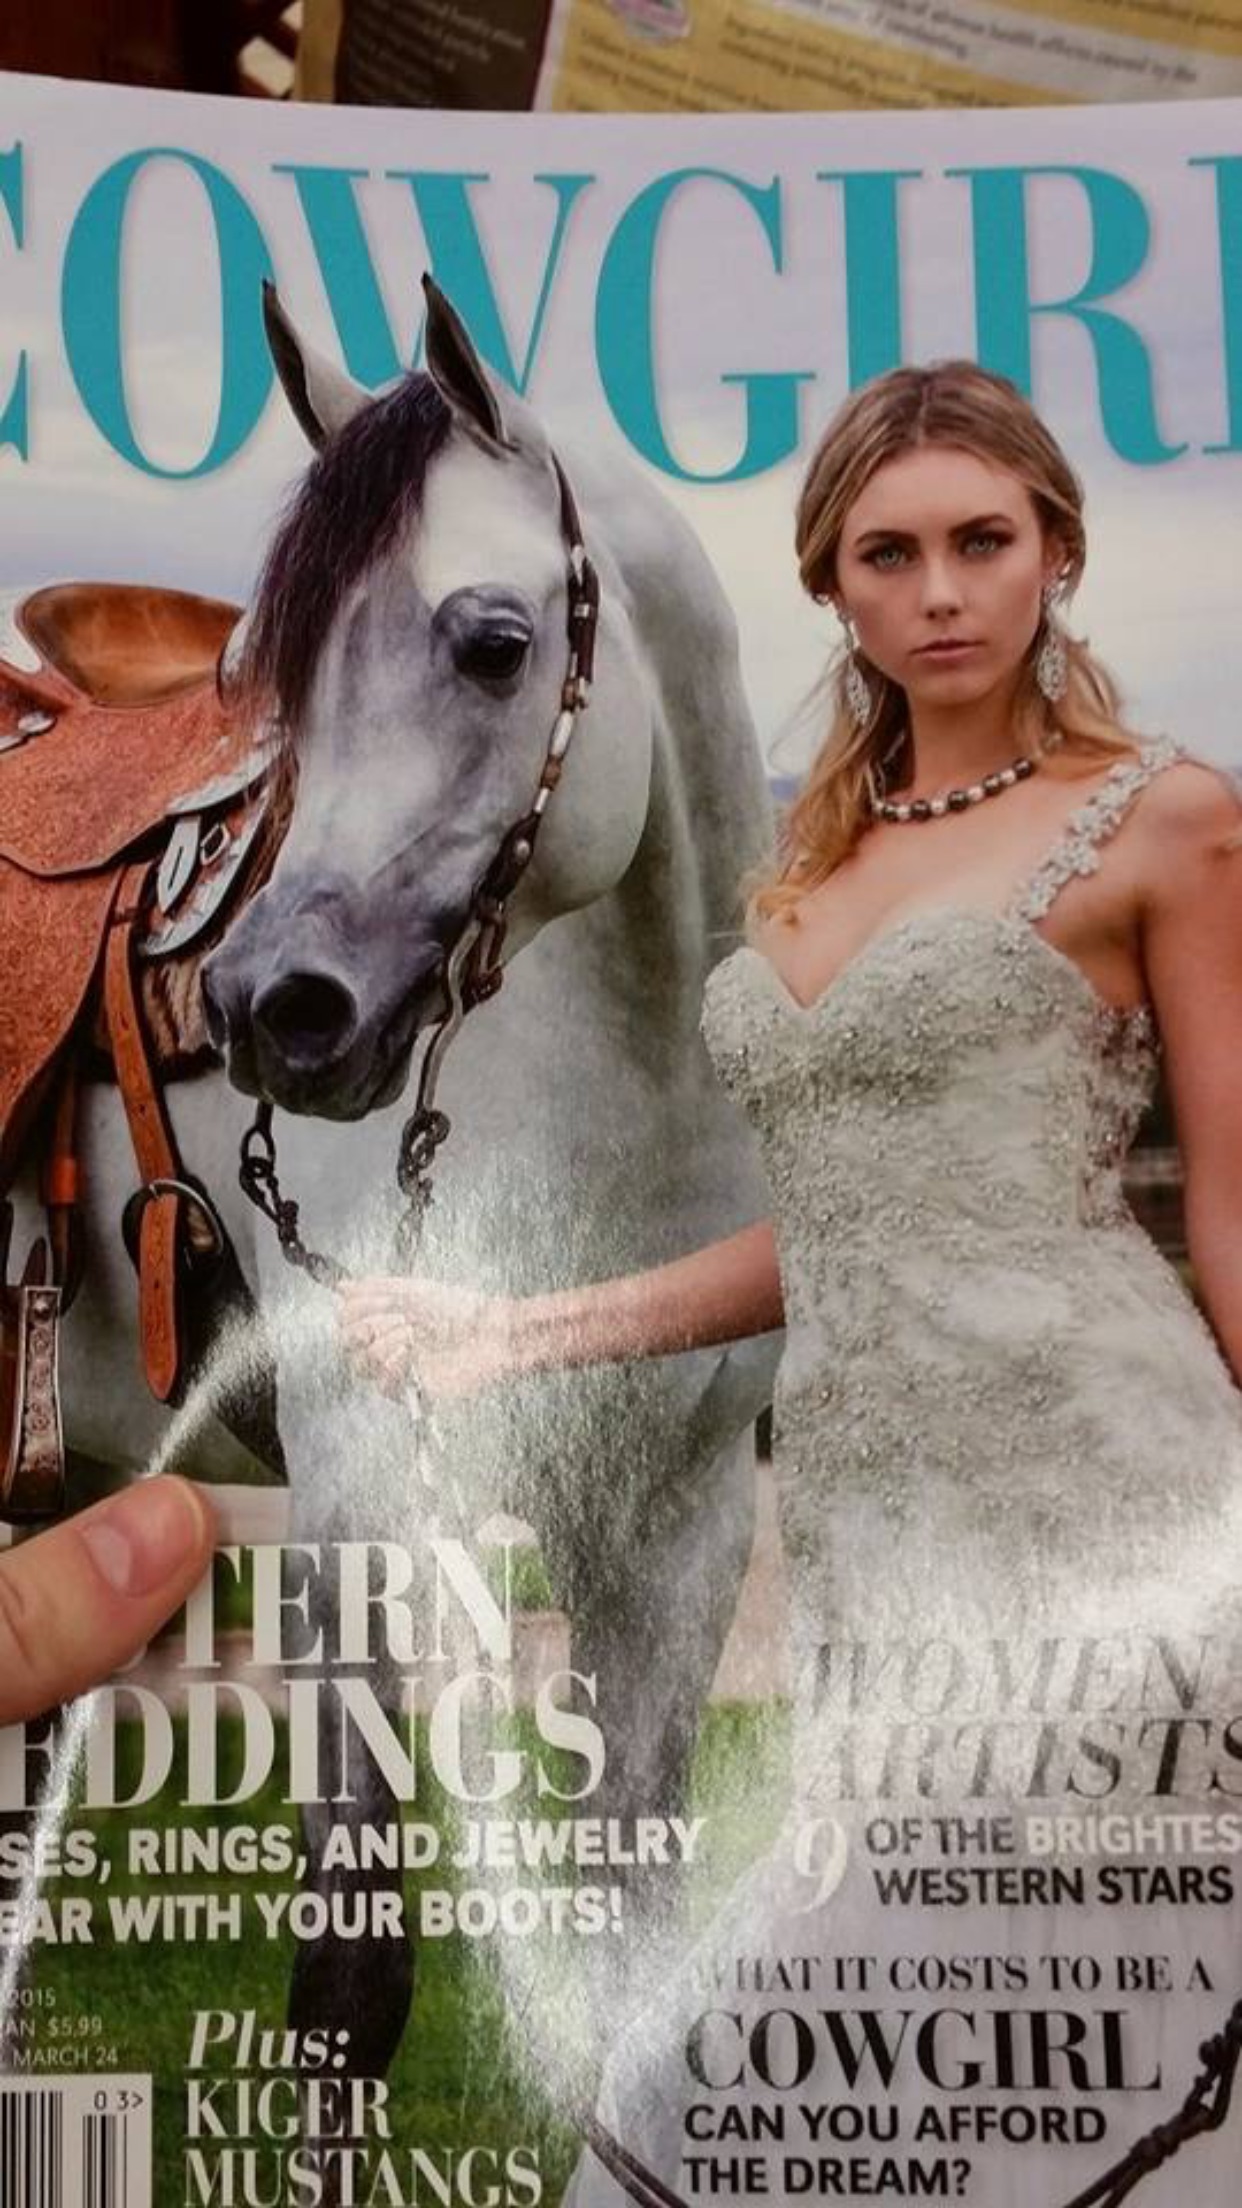 Natalie on her third cover of Cowgirl Magazine, 2015 wedding edition.